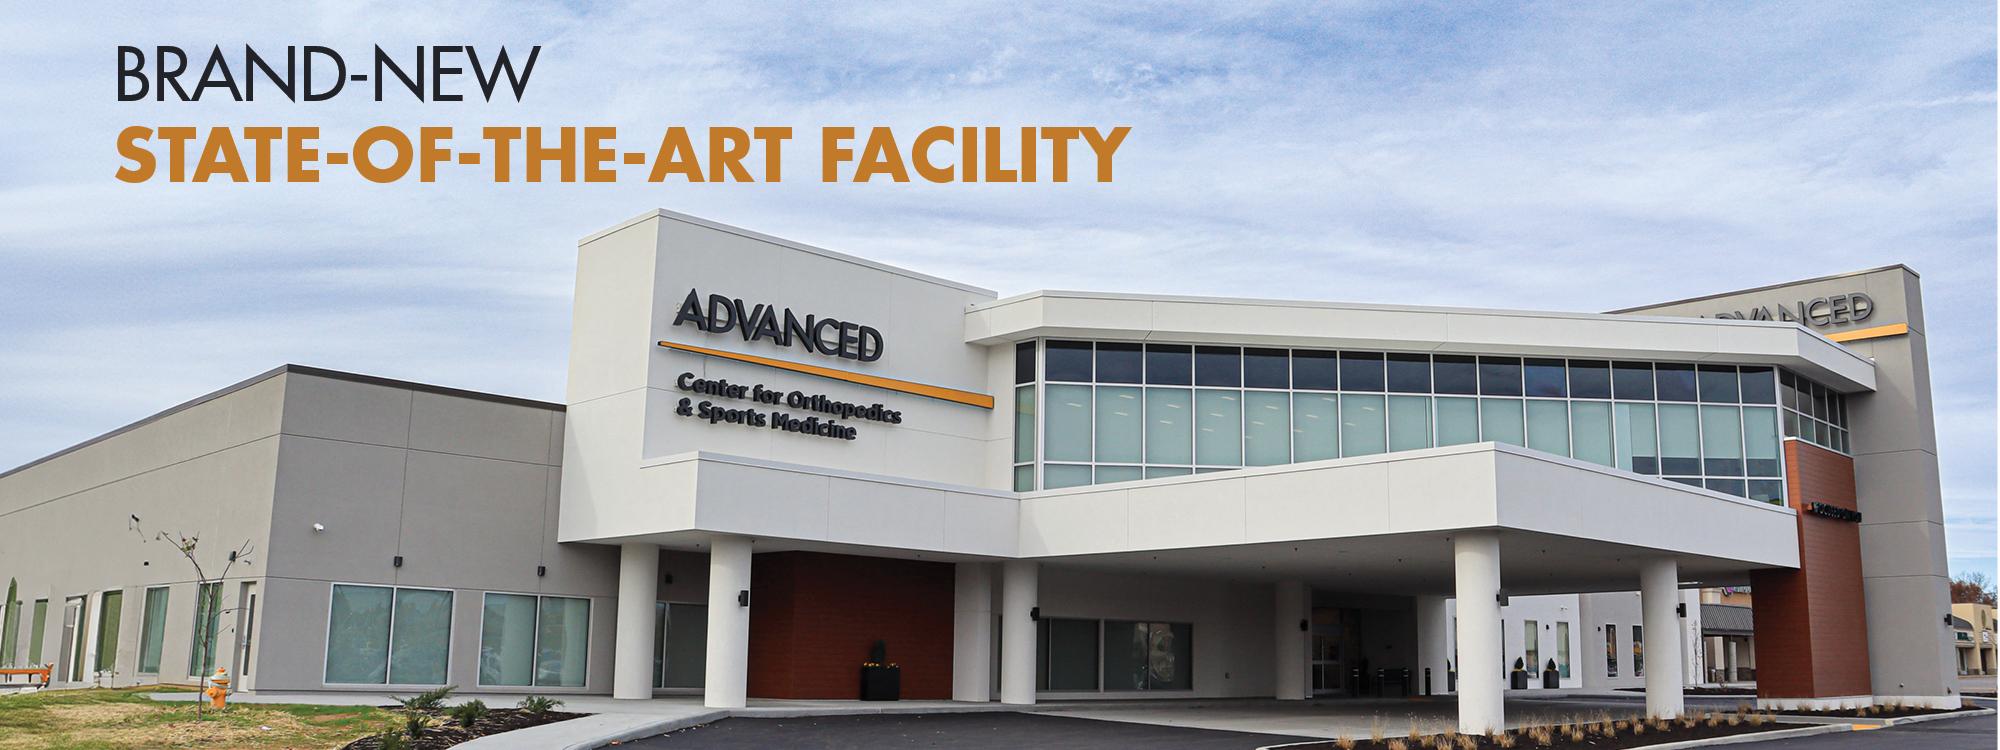 Brand-New State-of-the-Art Facility